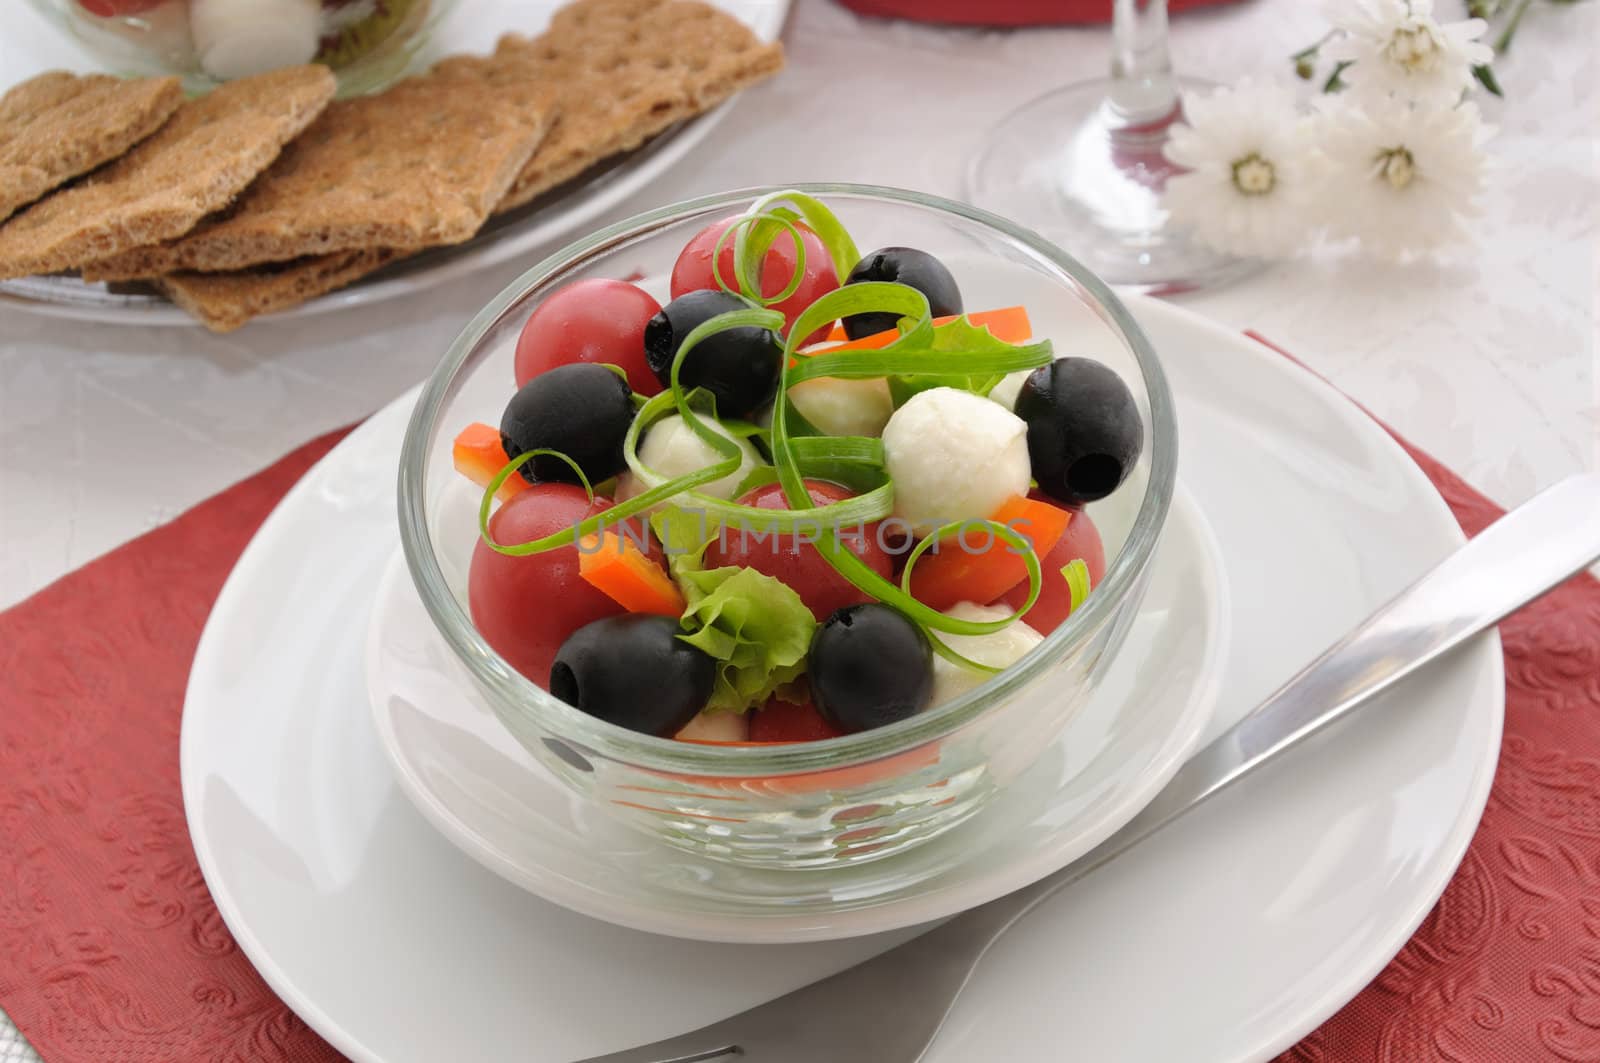 Salad of lettuce, cherry tomatoes, olives and mozzarella with pepper